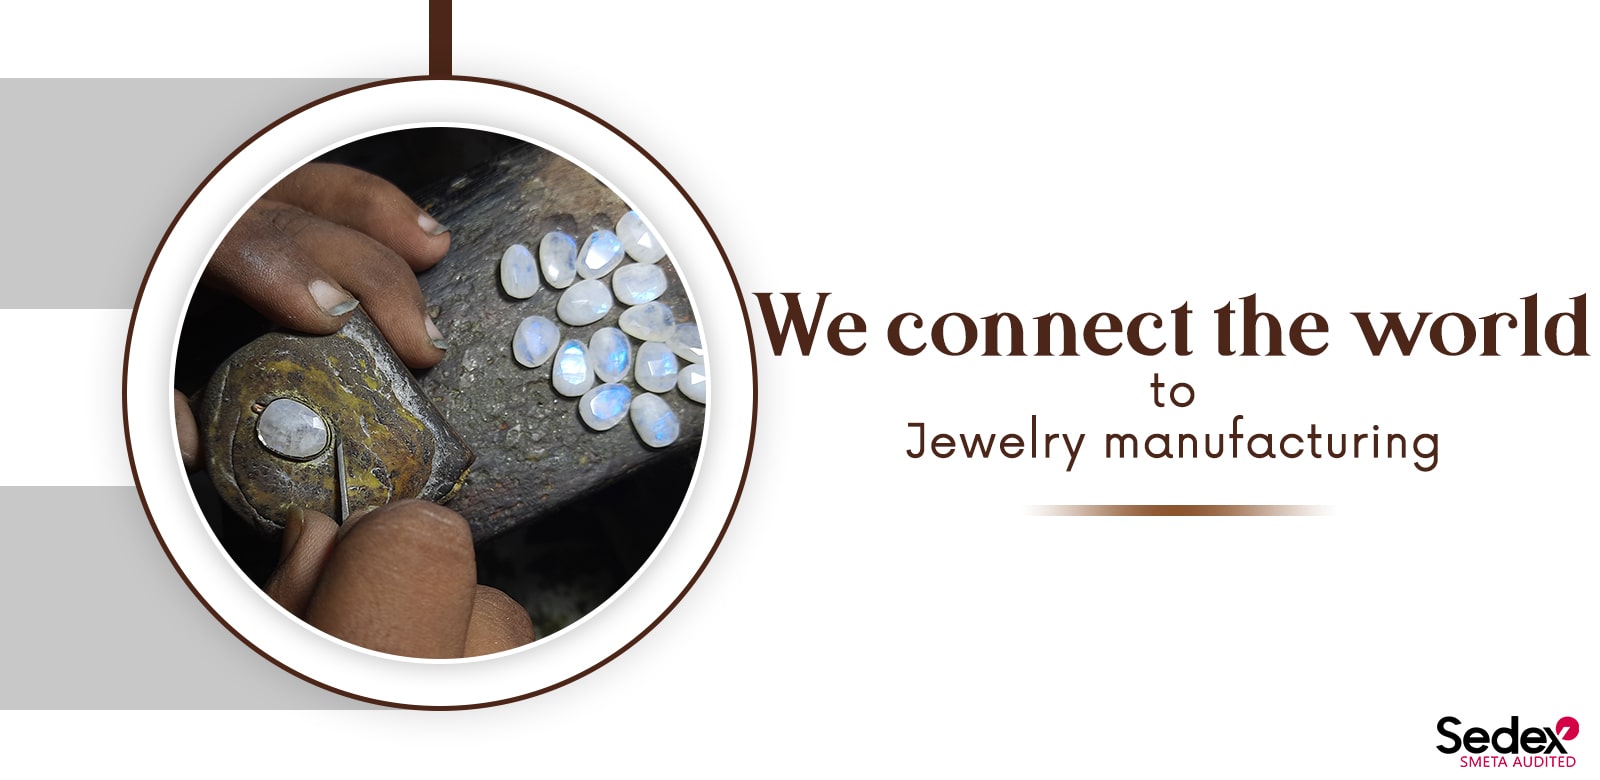 We connect the world to Jewelry manufacturing